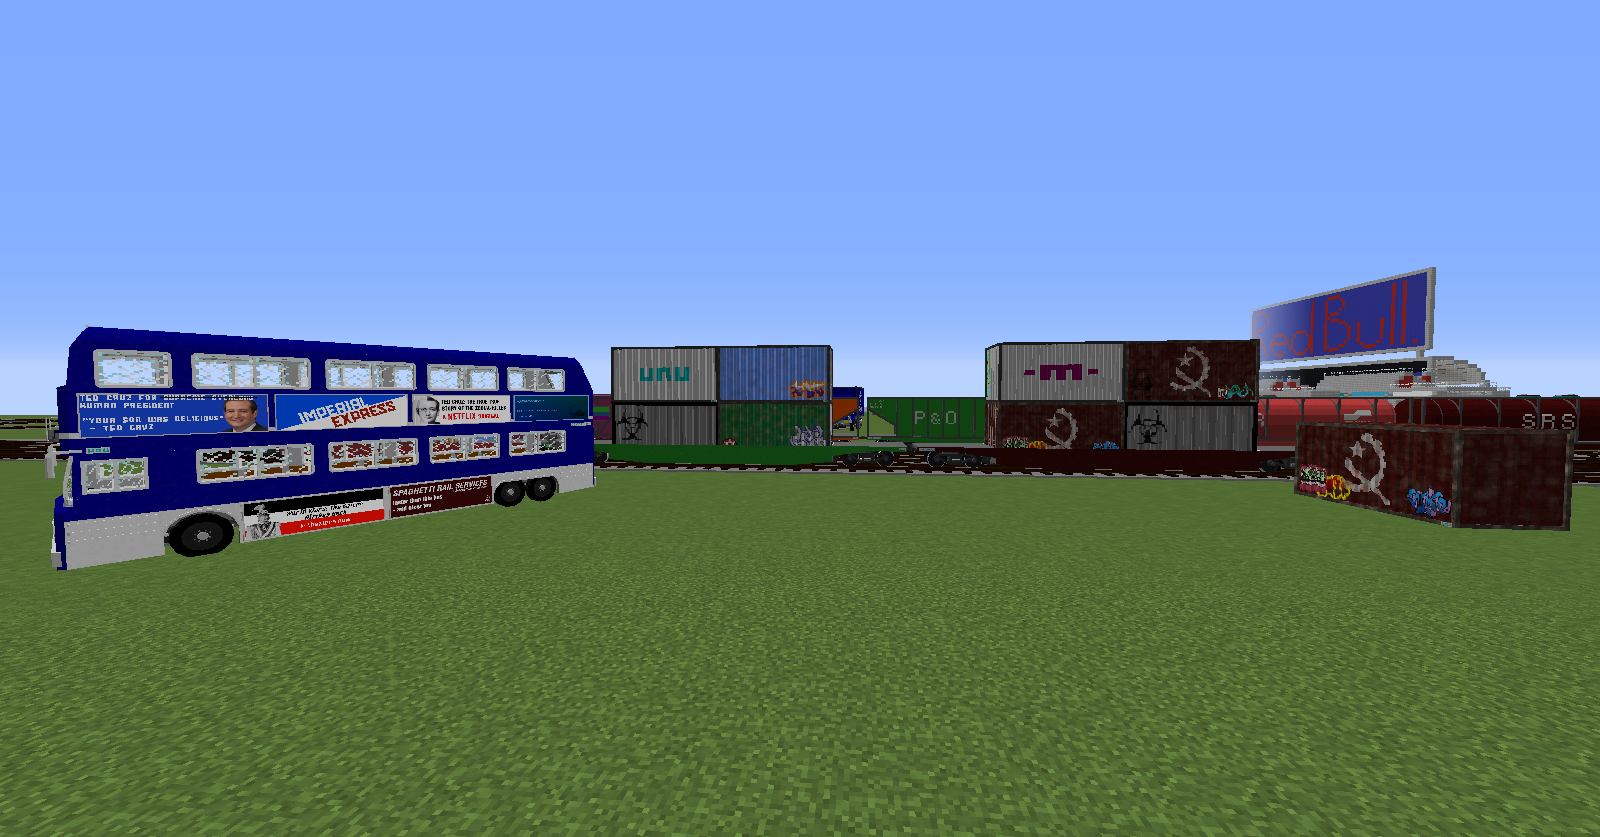 Custom Train Paint Schemes and even more bus ads